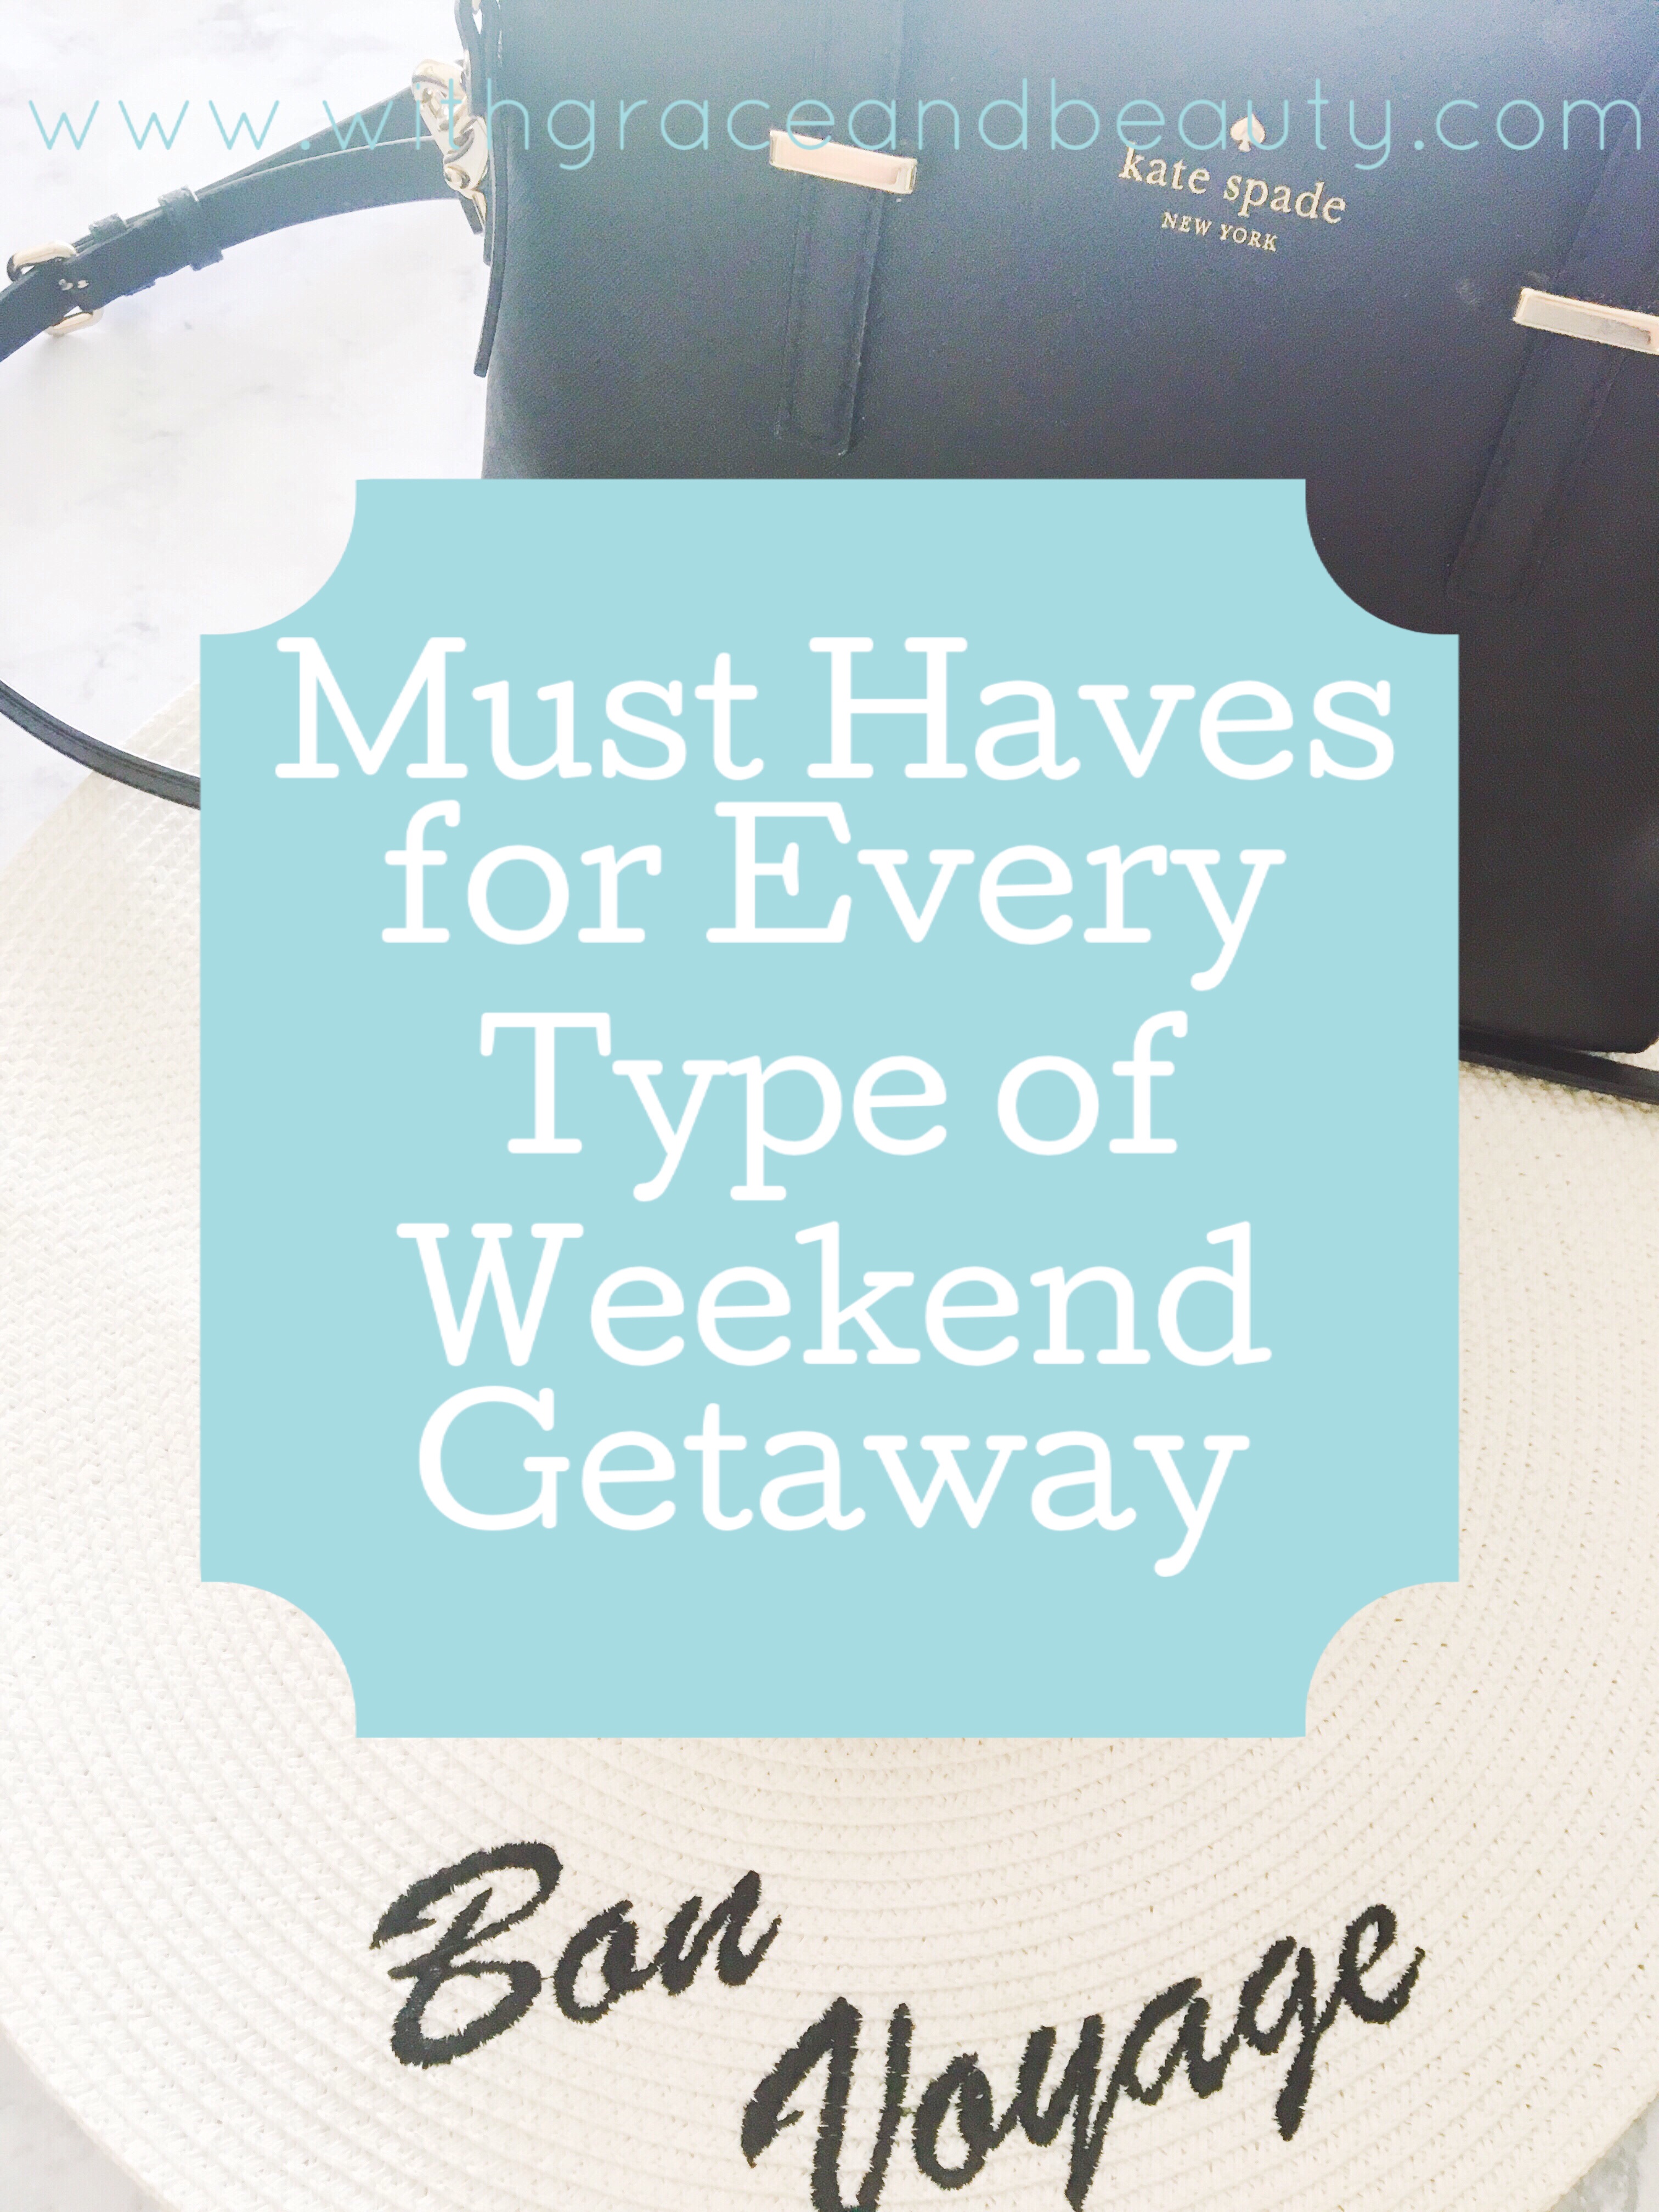 Must Haves for Every Type of Weekend Getaway | www.withgraceandbeauty.com